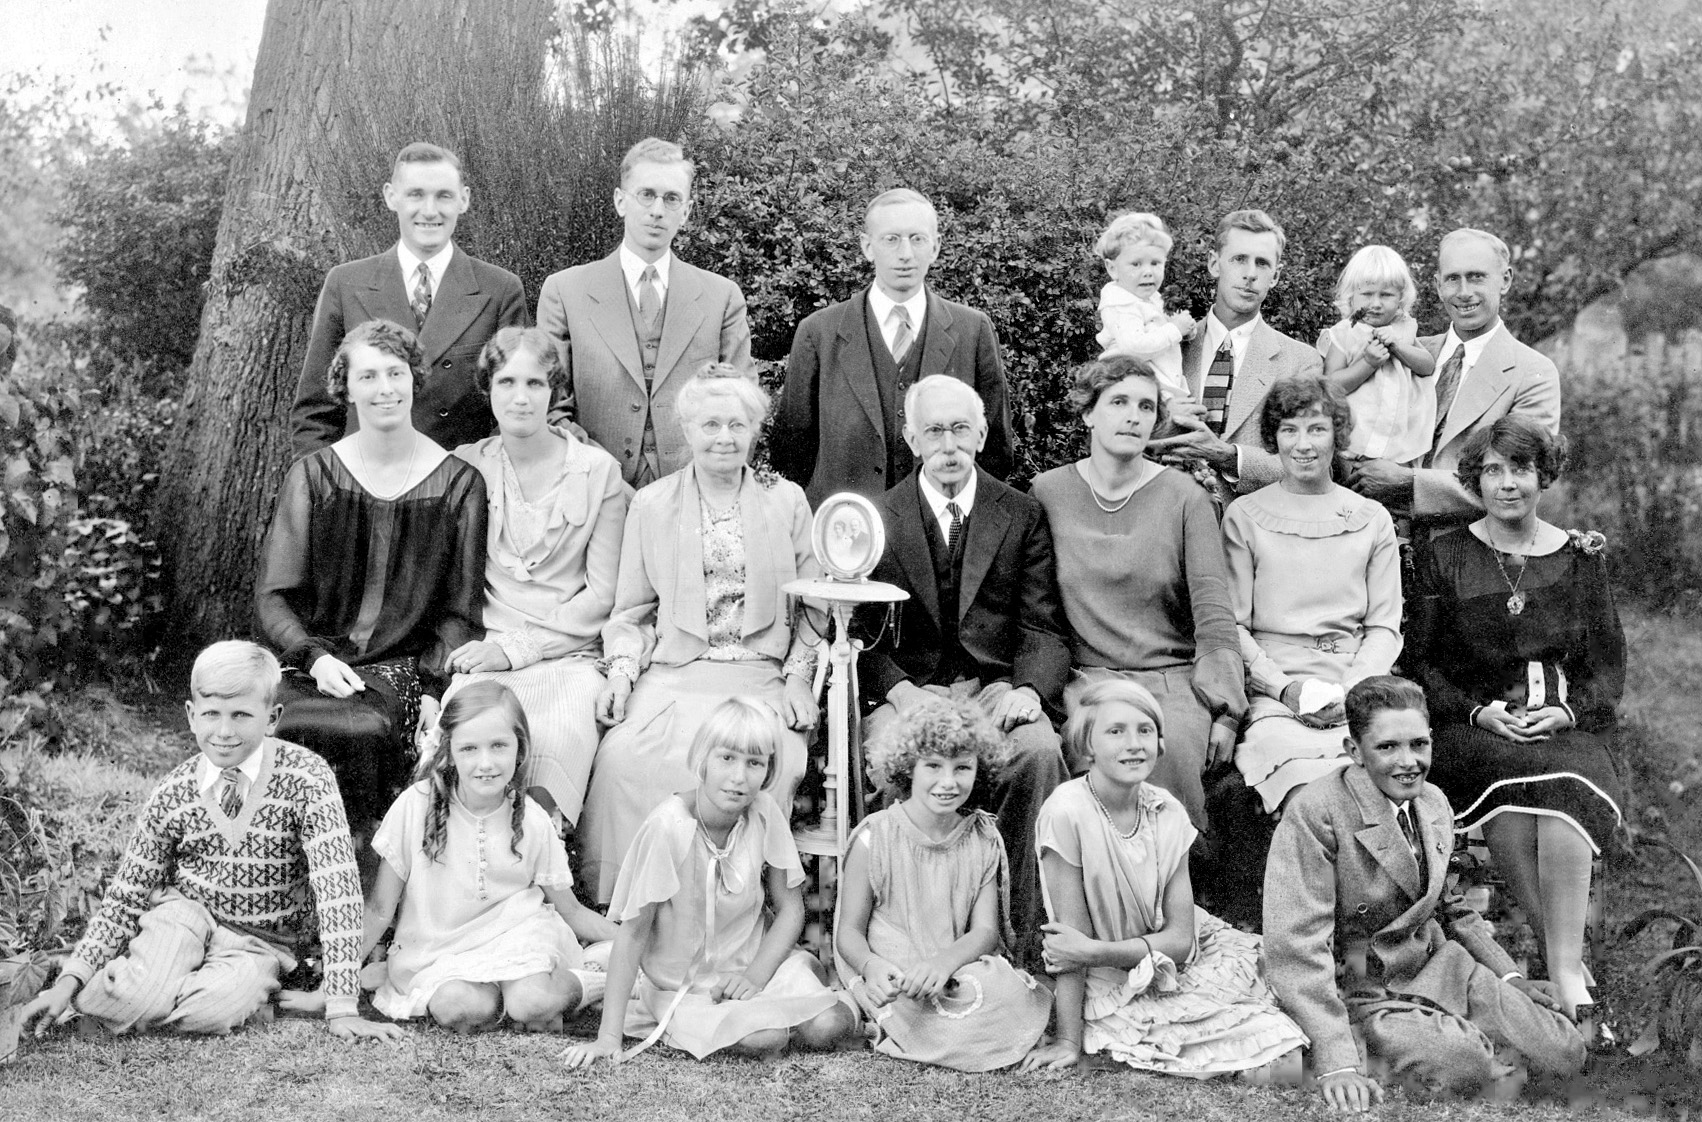 This is a portrait of my mother’s side of the family, taken about 1927. That’s her in the top right corner, at about the age of one, being held by my grandfather. My grandmother is in the dark dress, seated directly in front of them. Across the back row are my great-uncles, whom I don’t know too much about except that one of them suffered from “shell shock” during the Great War and was never the same afterward. I think he died an early death. Seated in front of them in the middle row are my great aunts. I don’t recall too much about them either, except that I think the one seated third from the right developed a very healthy dark mustache in her old age. Funny the stuff a kid remembers! 

In the front row, far left, is my uncle Jack (seen here 25 years later). Also in the front row, third from the left is my aunt Peggy. The two people in the middle row center are my great-grandfather and my great-grandmother. On the table of honor in the epicenter of it all are the smiling visages of my great-great-grandfather and my great-great-grandmother. Quite a clan! View full size.   

That side of my family hails from England; my grandfather emigrated to the US in 1911 and my grandmother followed him in 1915 on the last passenger steamer to sail from England before the sinking of the Lusitania. Some of the family moved to Canada or New Zealand, but most stayed in England. I wish I’d been able to know them better!
